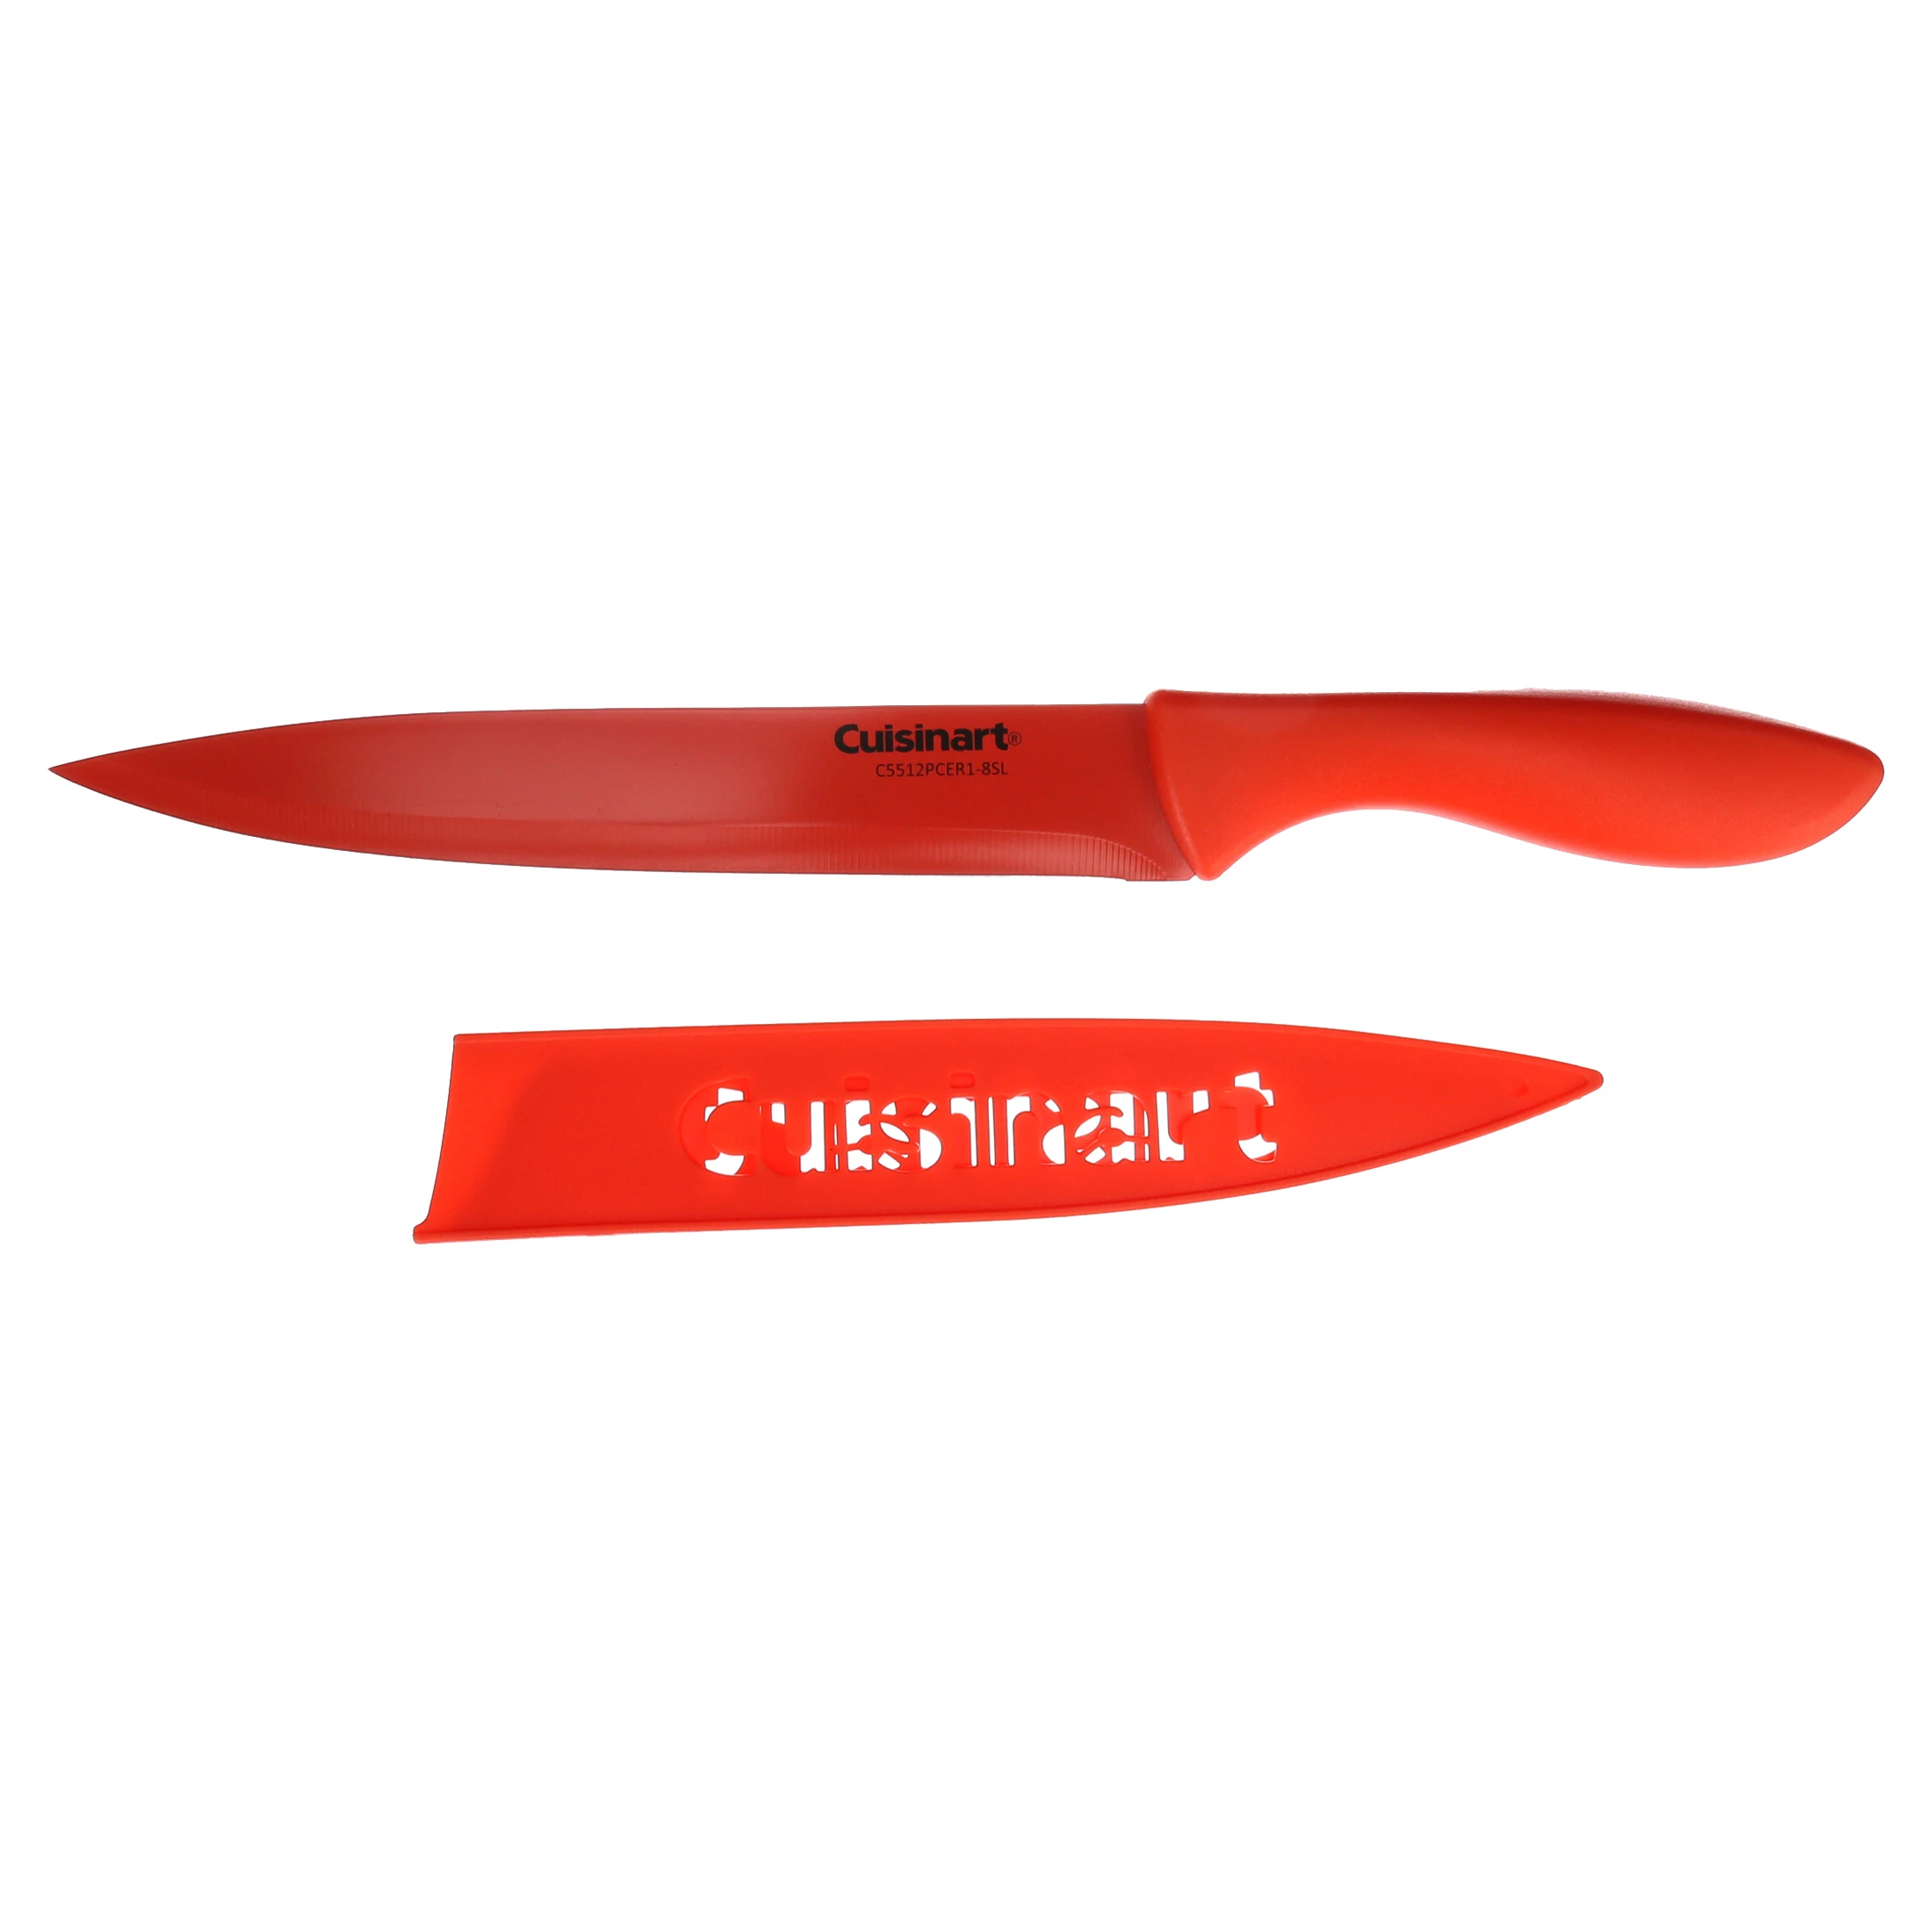 https://ae01.alicdn.com/kf/Sf95870d9dfc94e12ac2cd15b9ac01bb4q/free-shipping-12Piece-Ceramic-Coated-Color-Knife-Set-with-Blade-Guards.jpeg